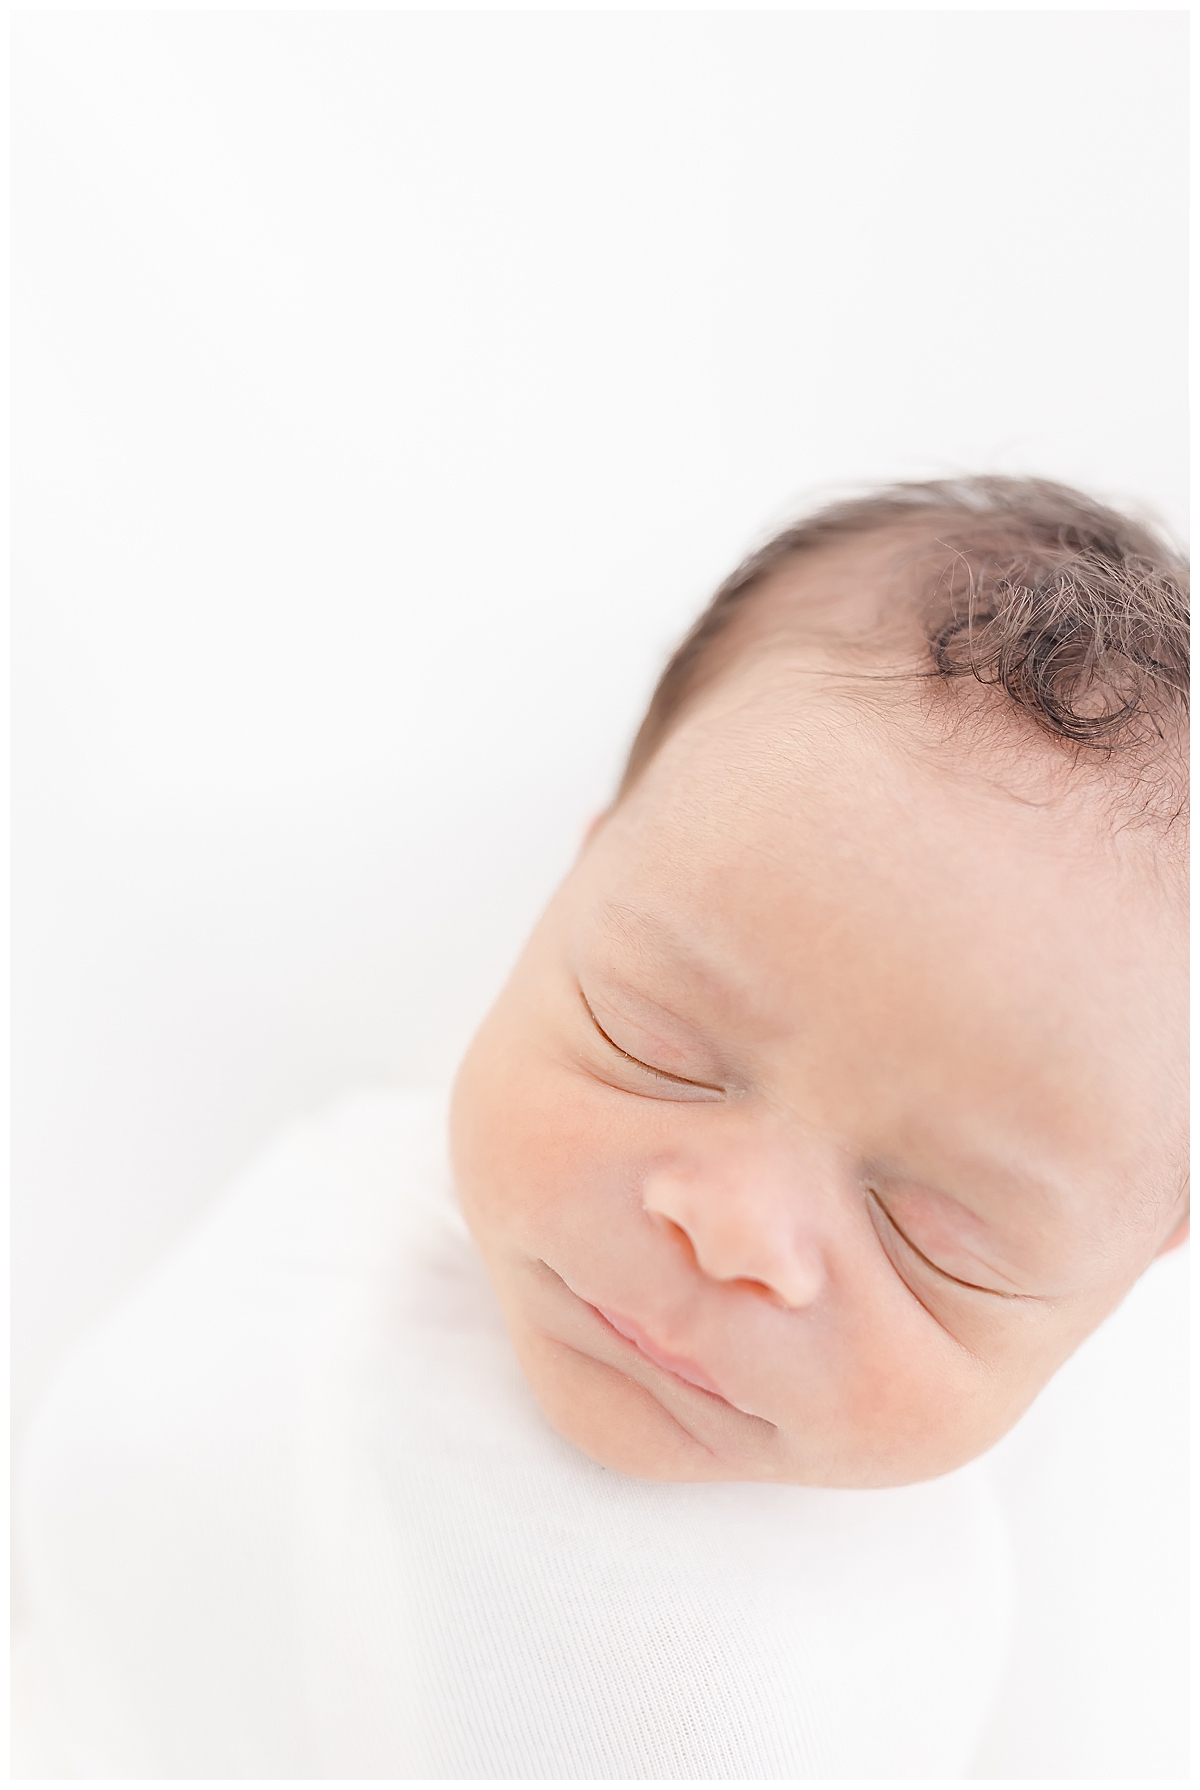 Newborn wrapped in white swaddle